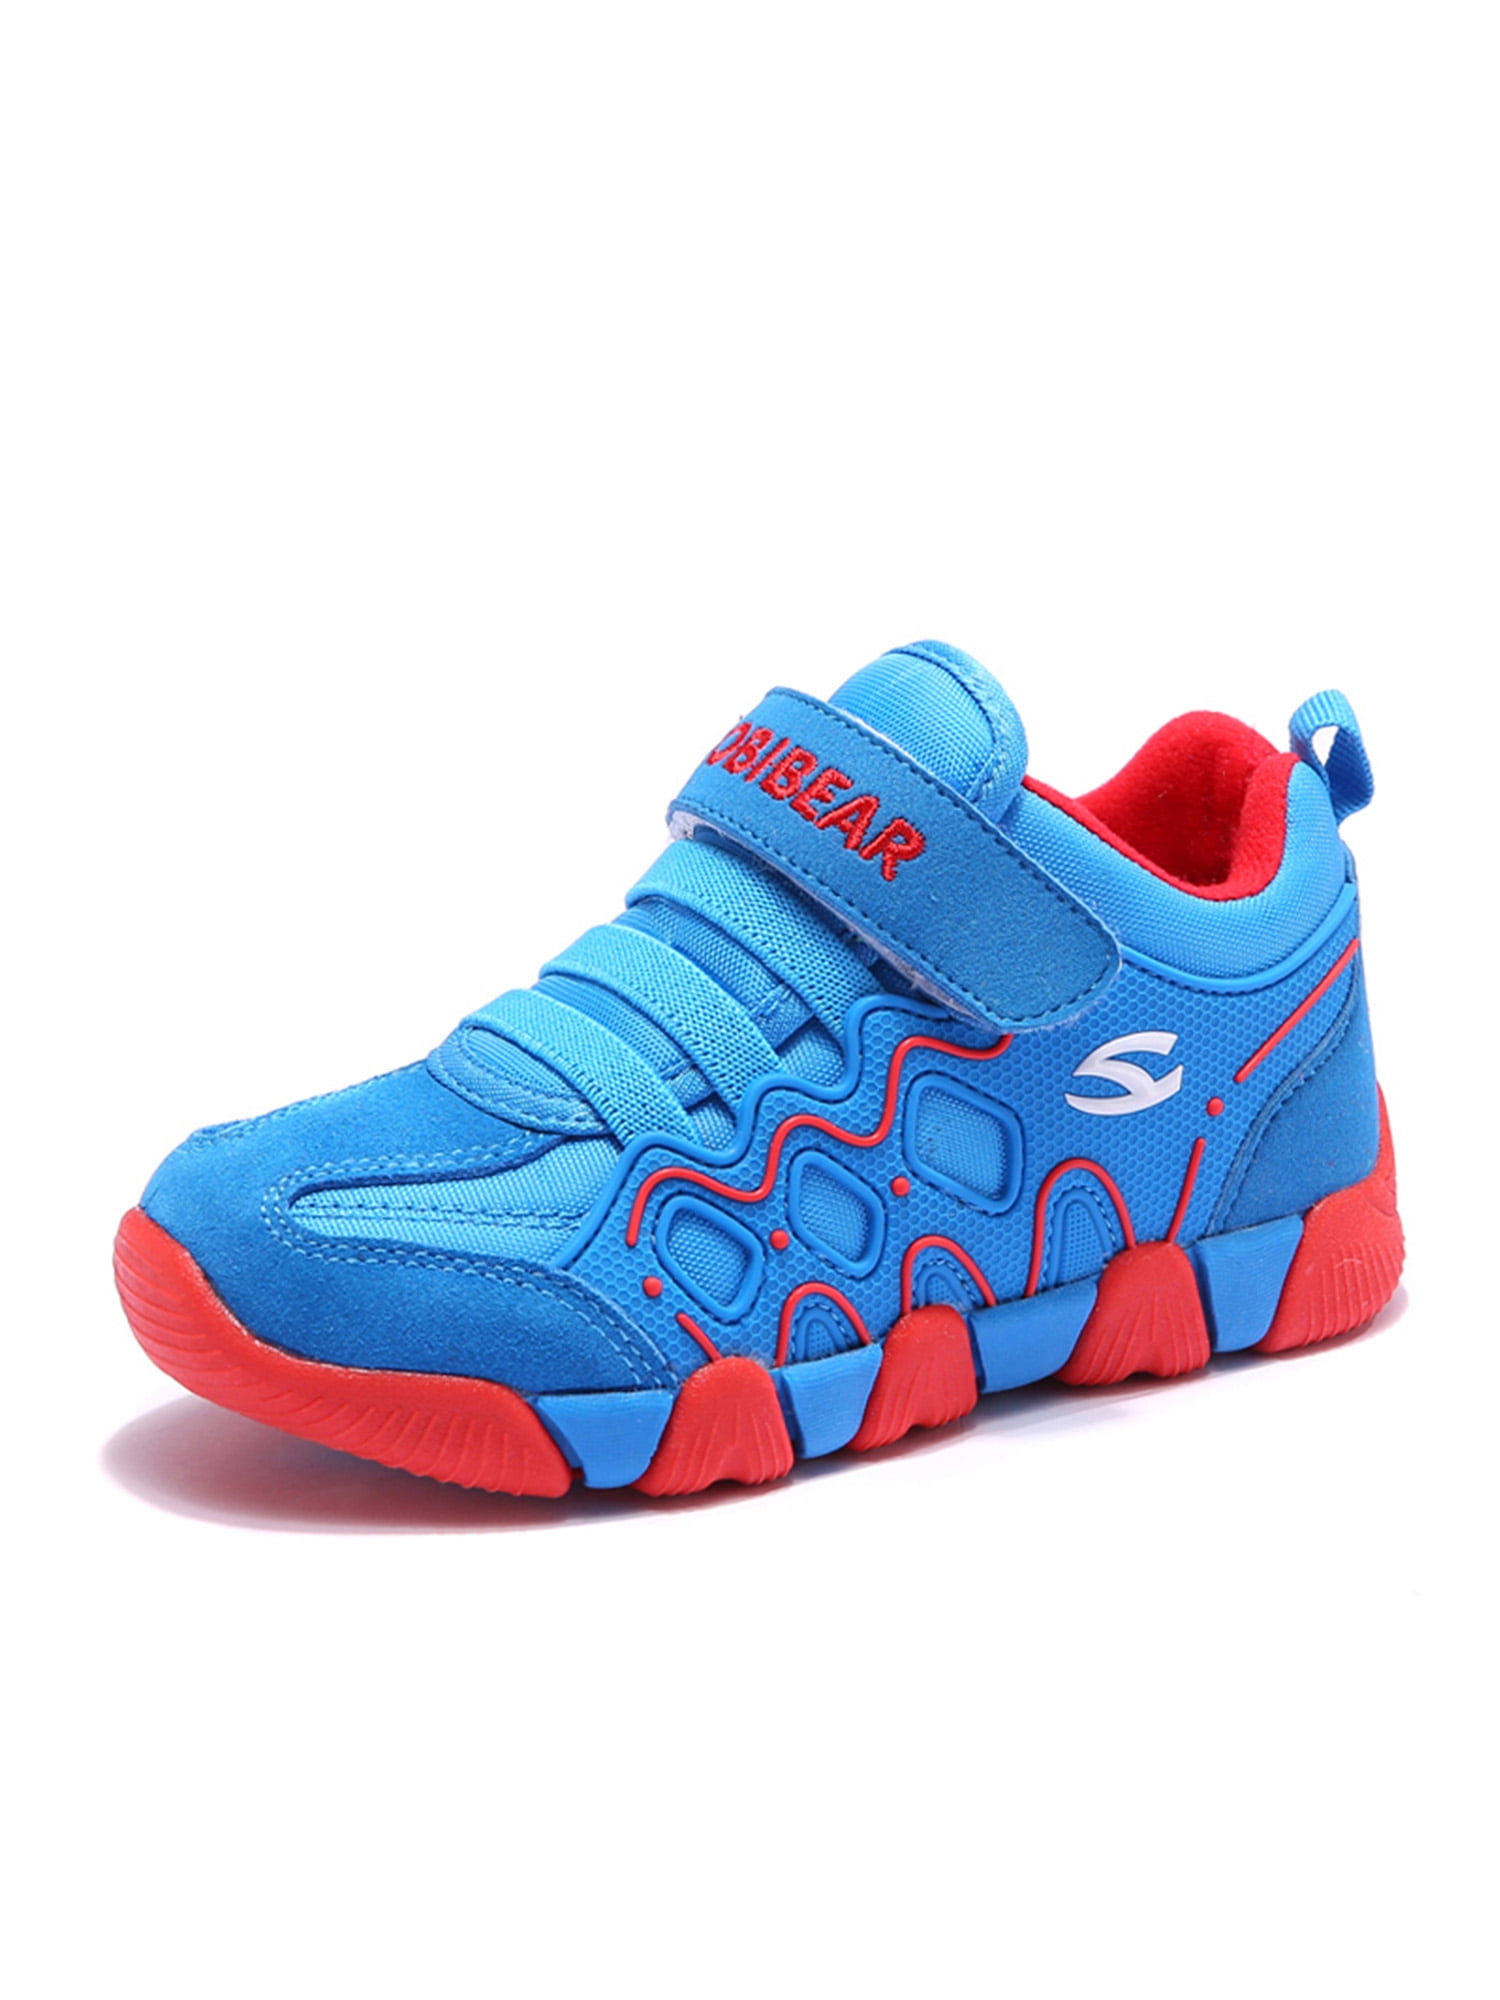 Kids Running Shoes Soft Sneakers 